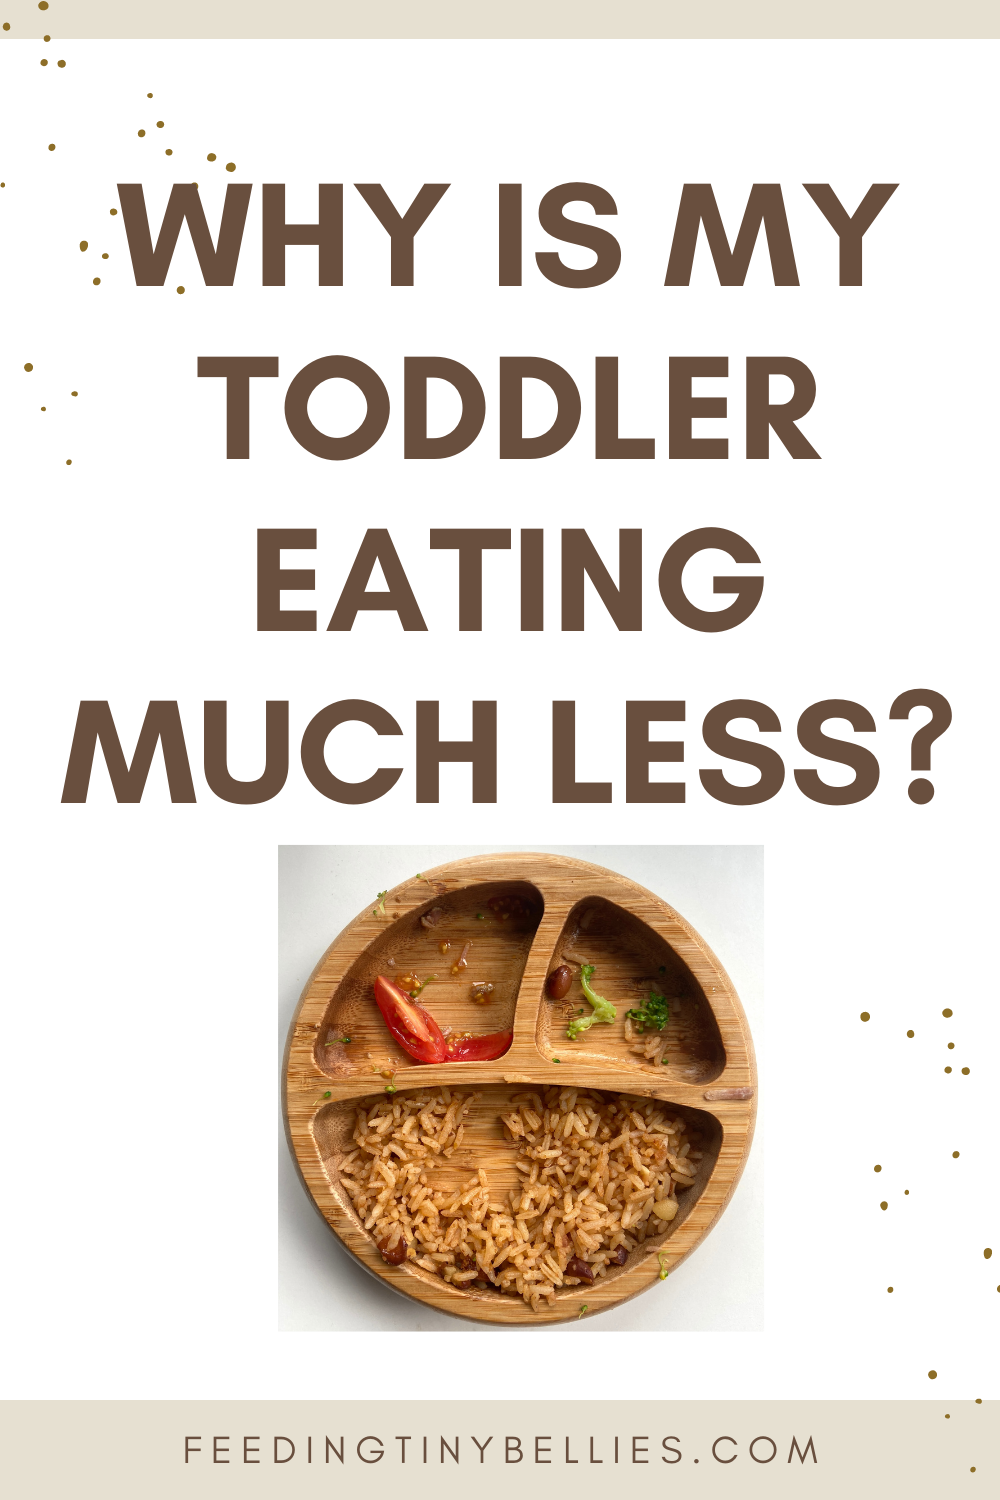 Why is my toddler eating much less?